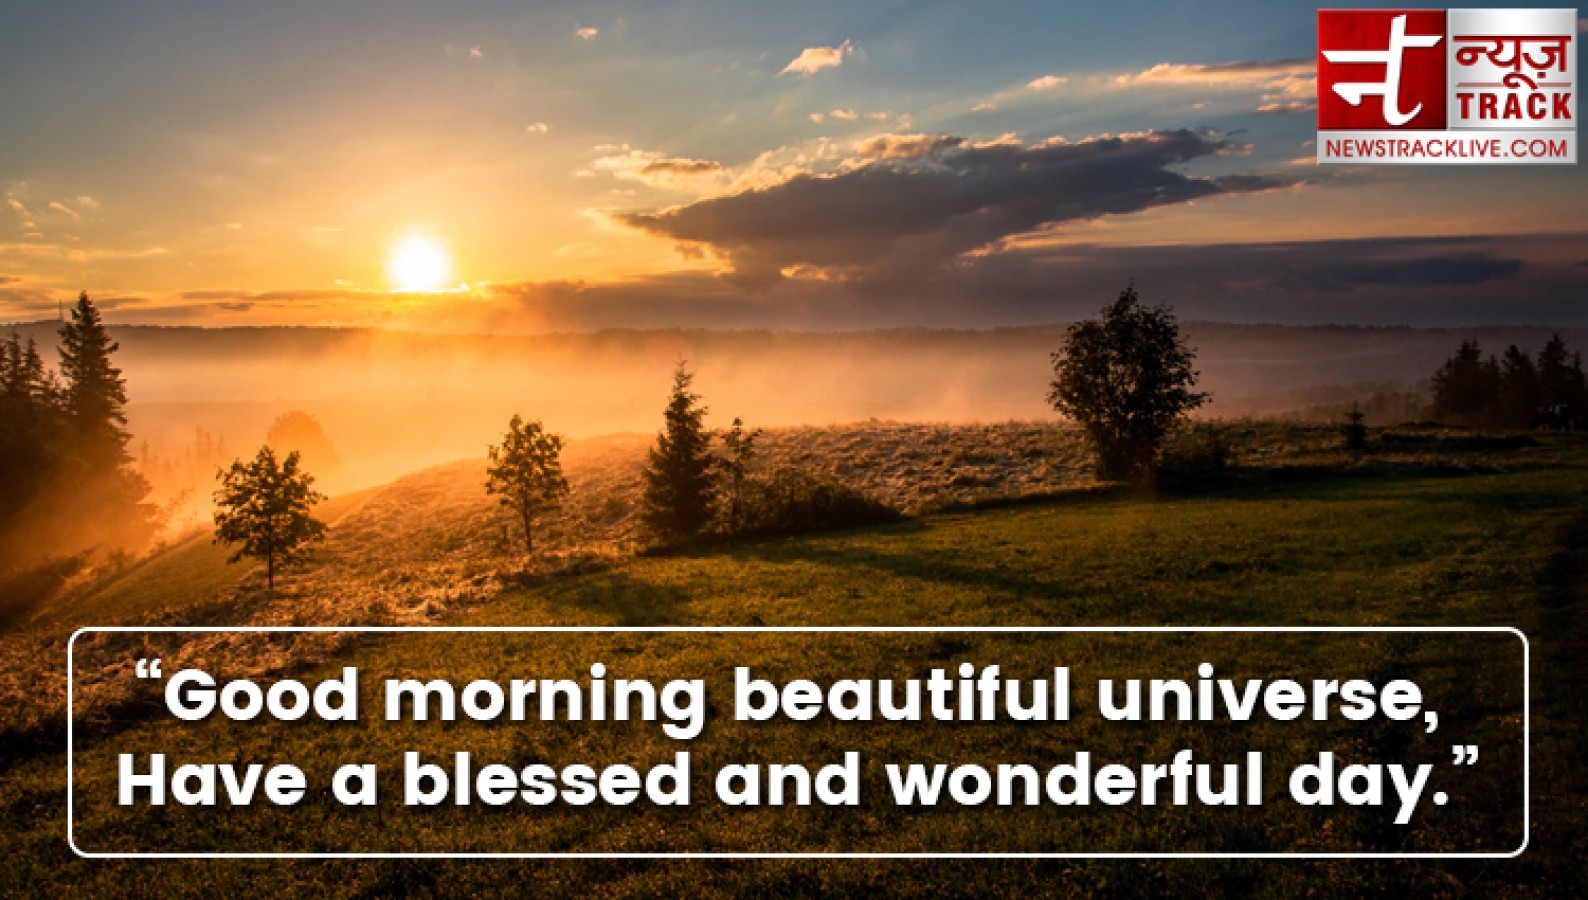 These beautiful good morning quotes will make your day marvellous |  NewsTrack English 1